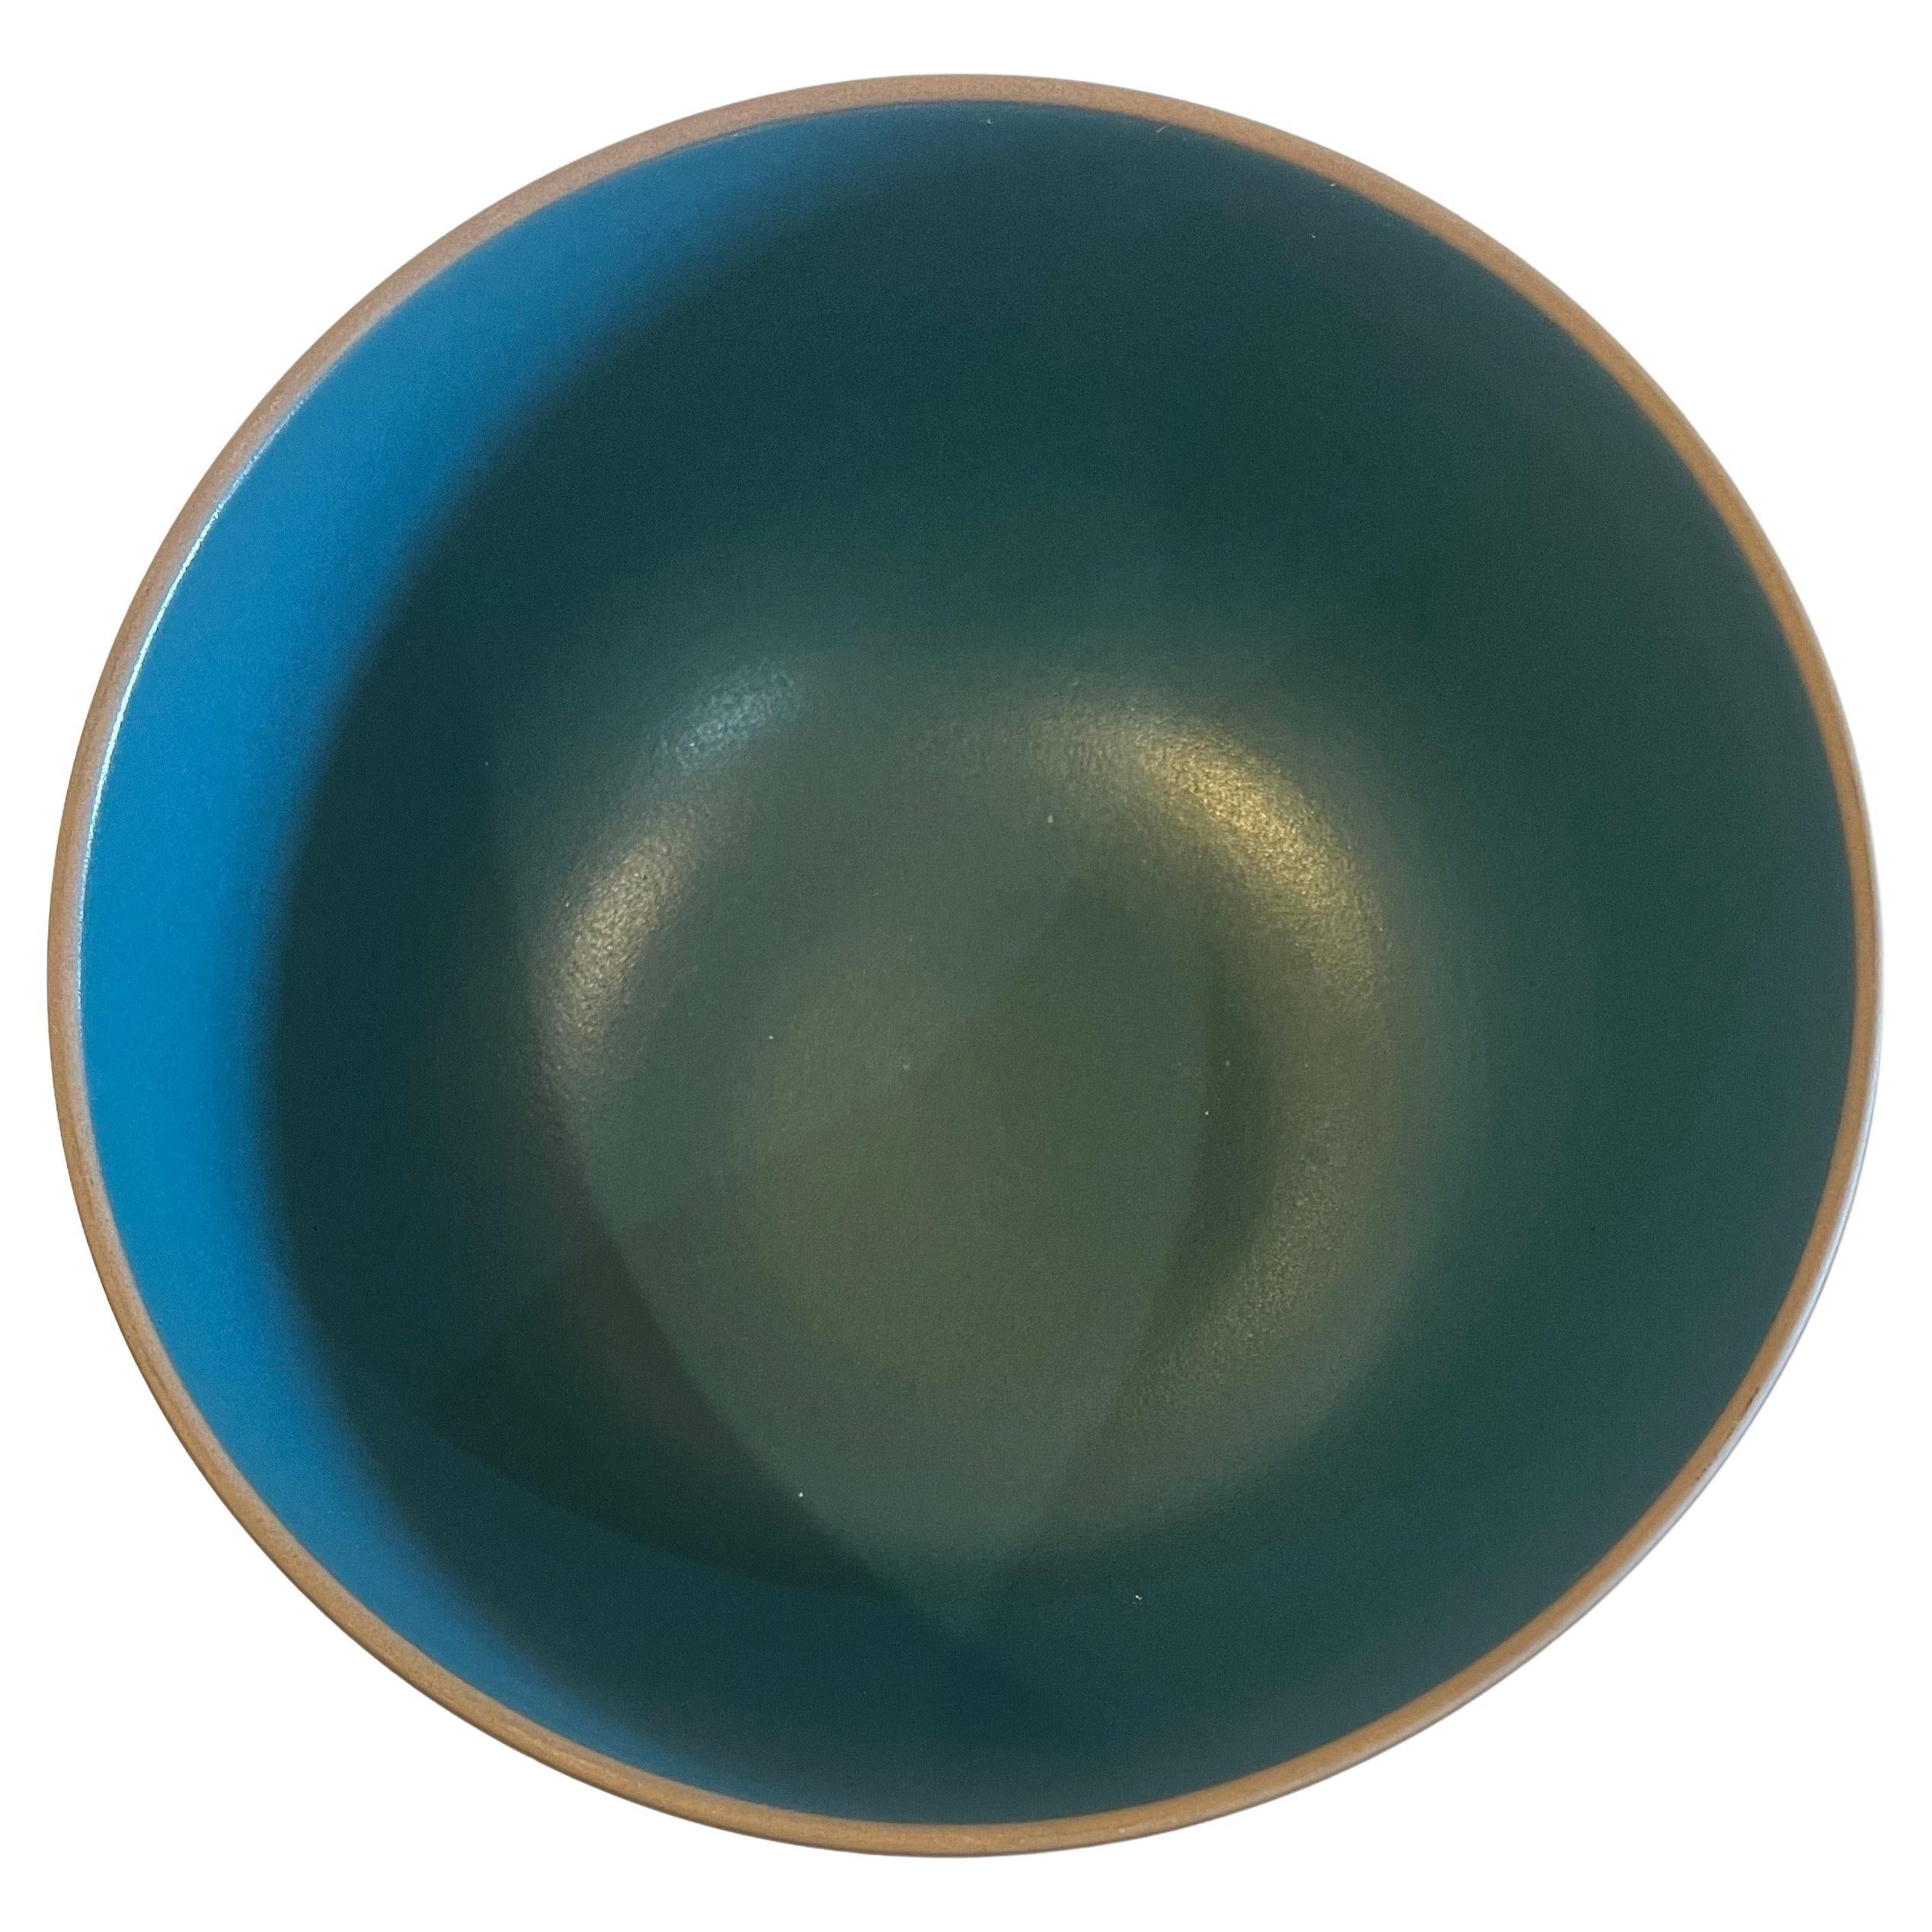 Beautiful and rare double tone large bowl design by Heath Ceramics of San Francisco California nice lines ceramic with no chips or cracks and beautiful color.